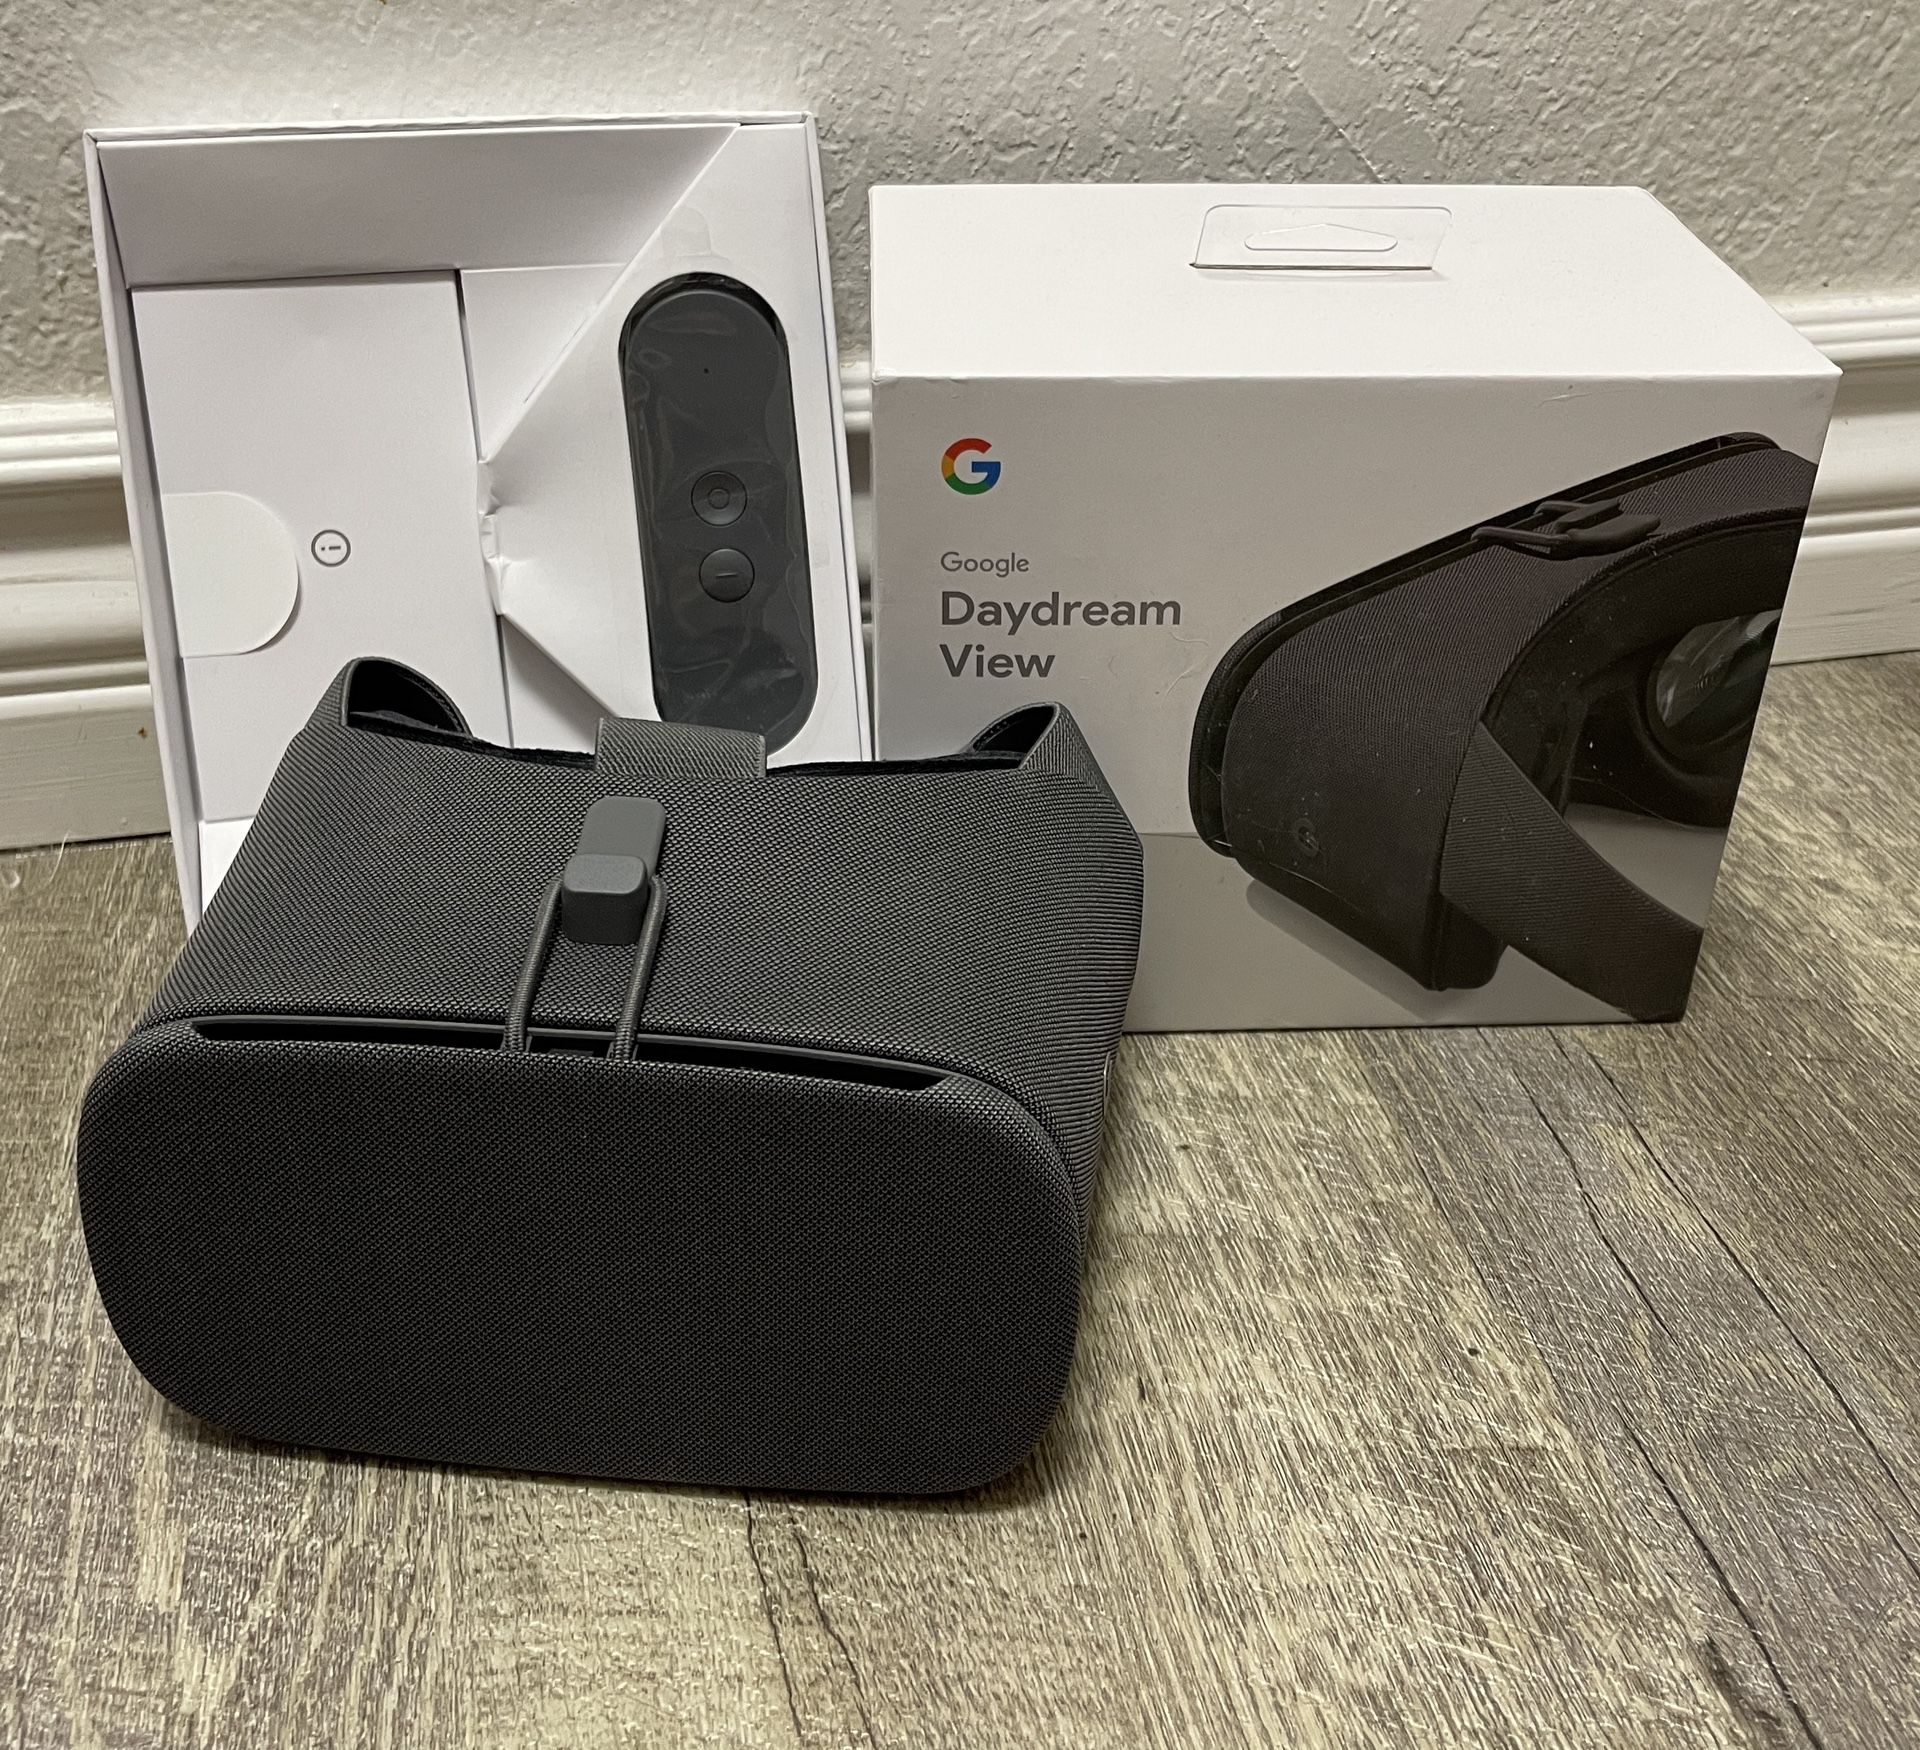 Google Daydream View Mobile VR Headset - New In Box 